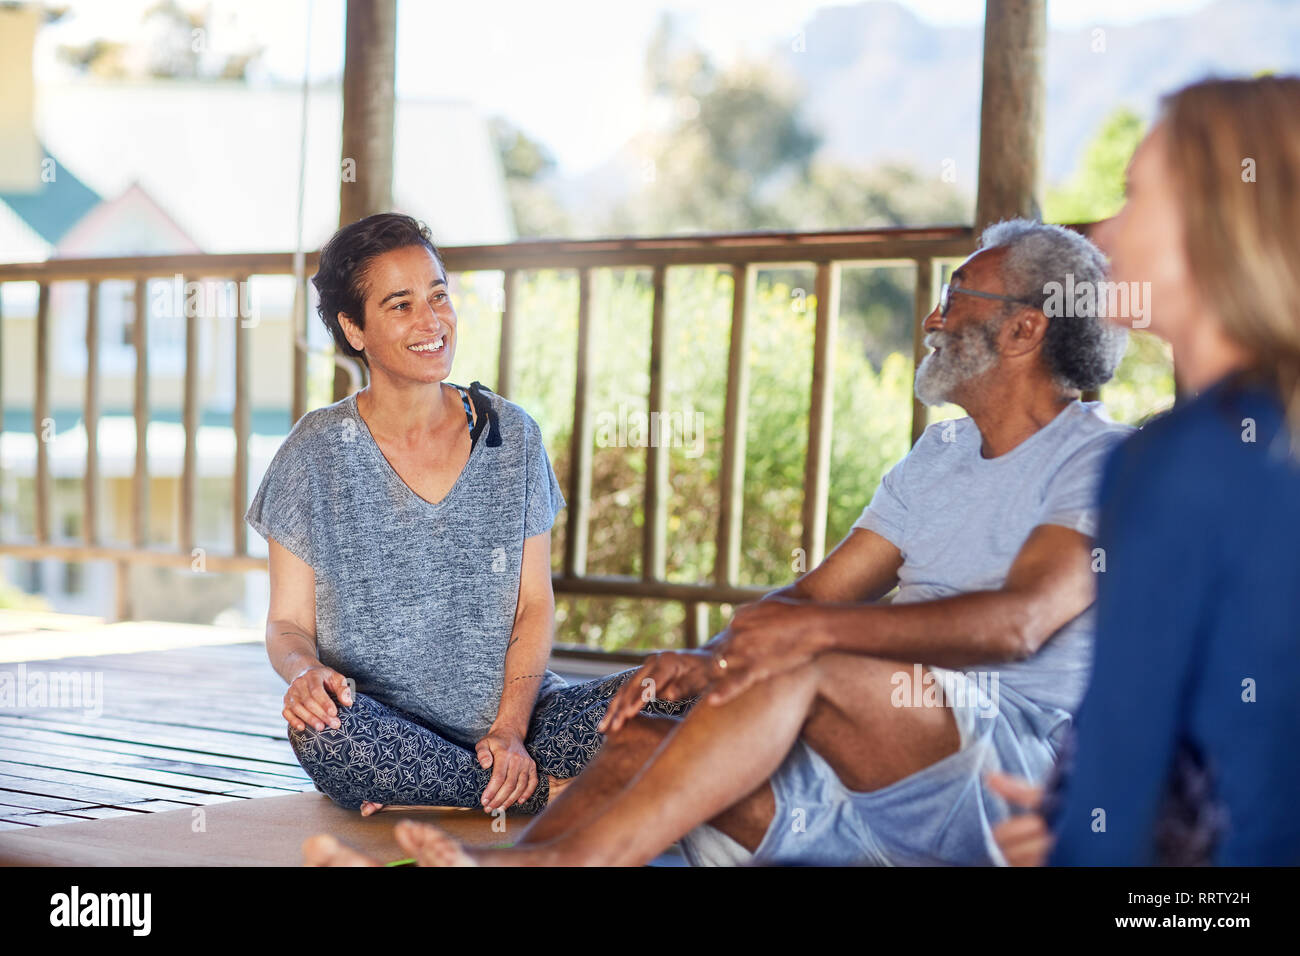 Smiling man and woman talking in hut during yoga retreat Stock Photo